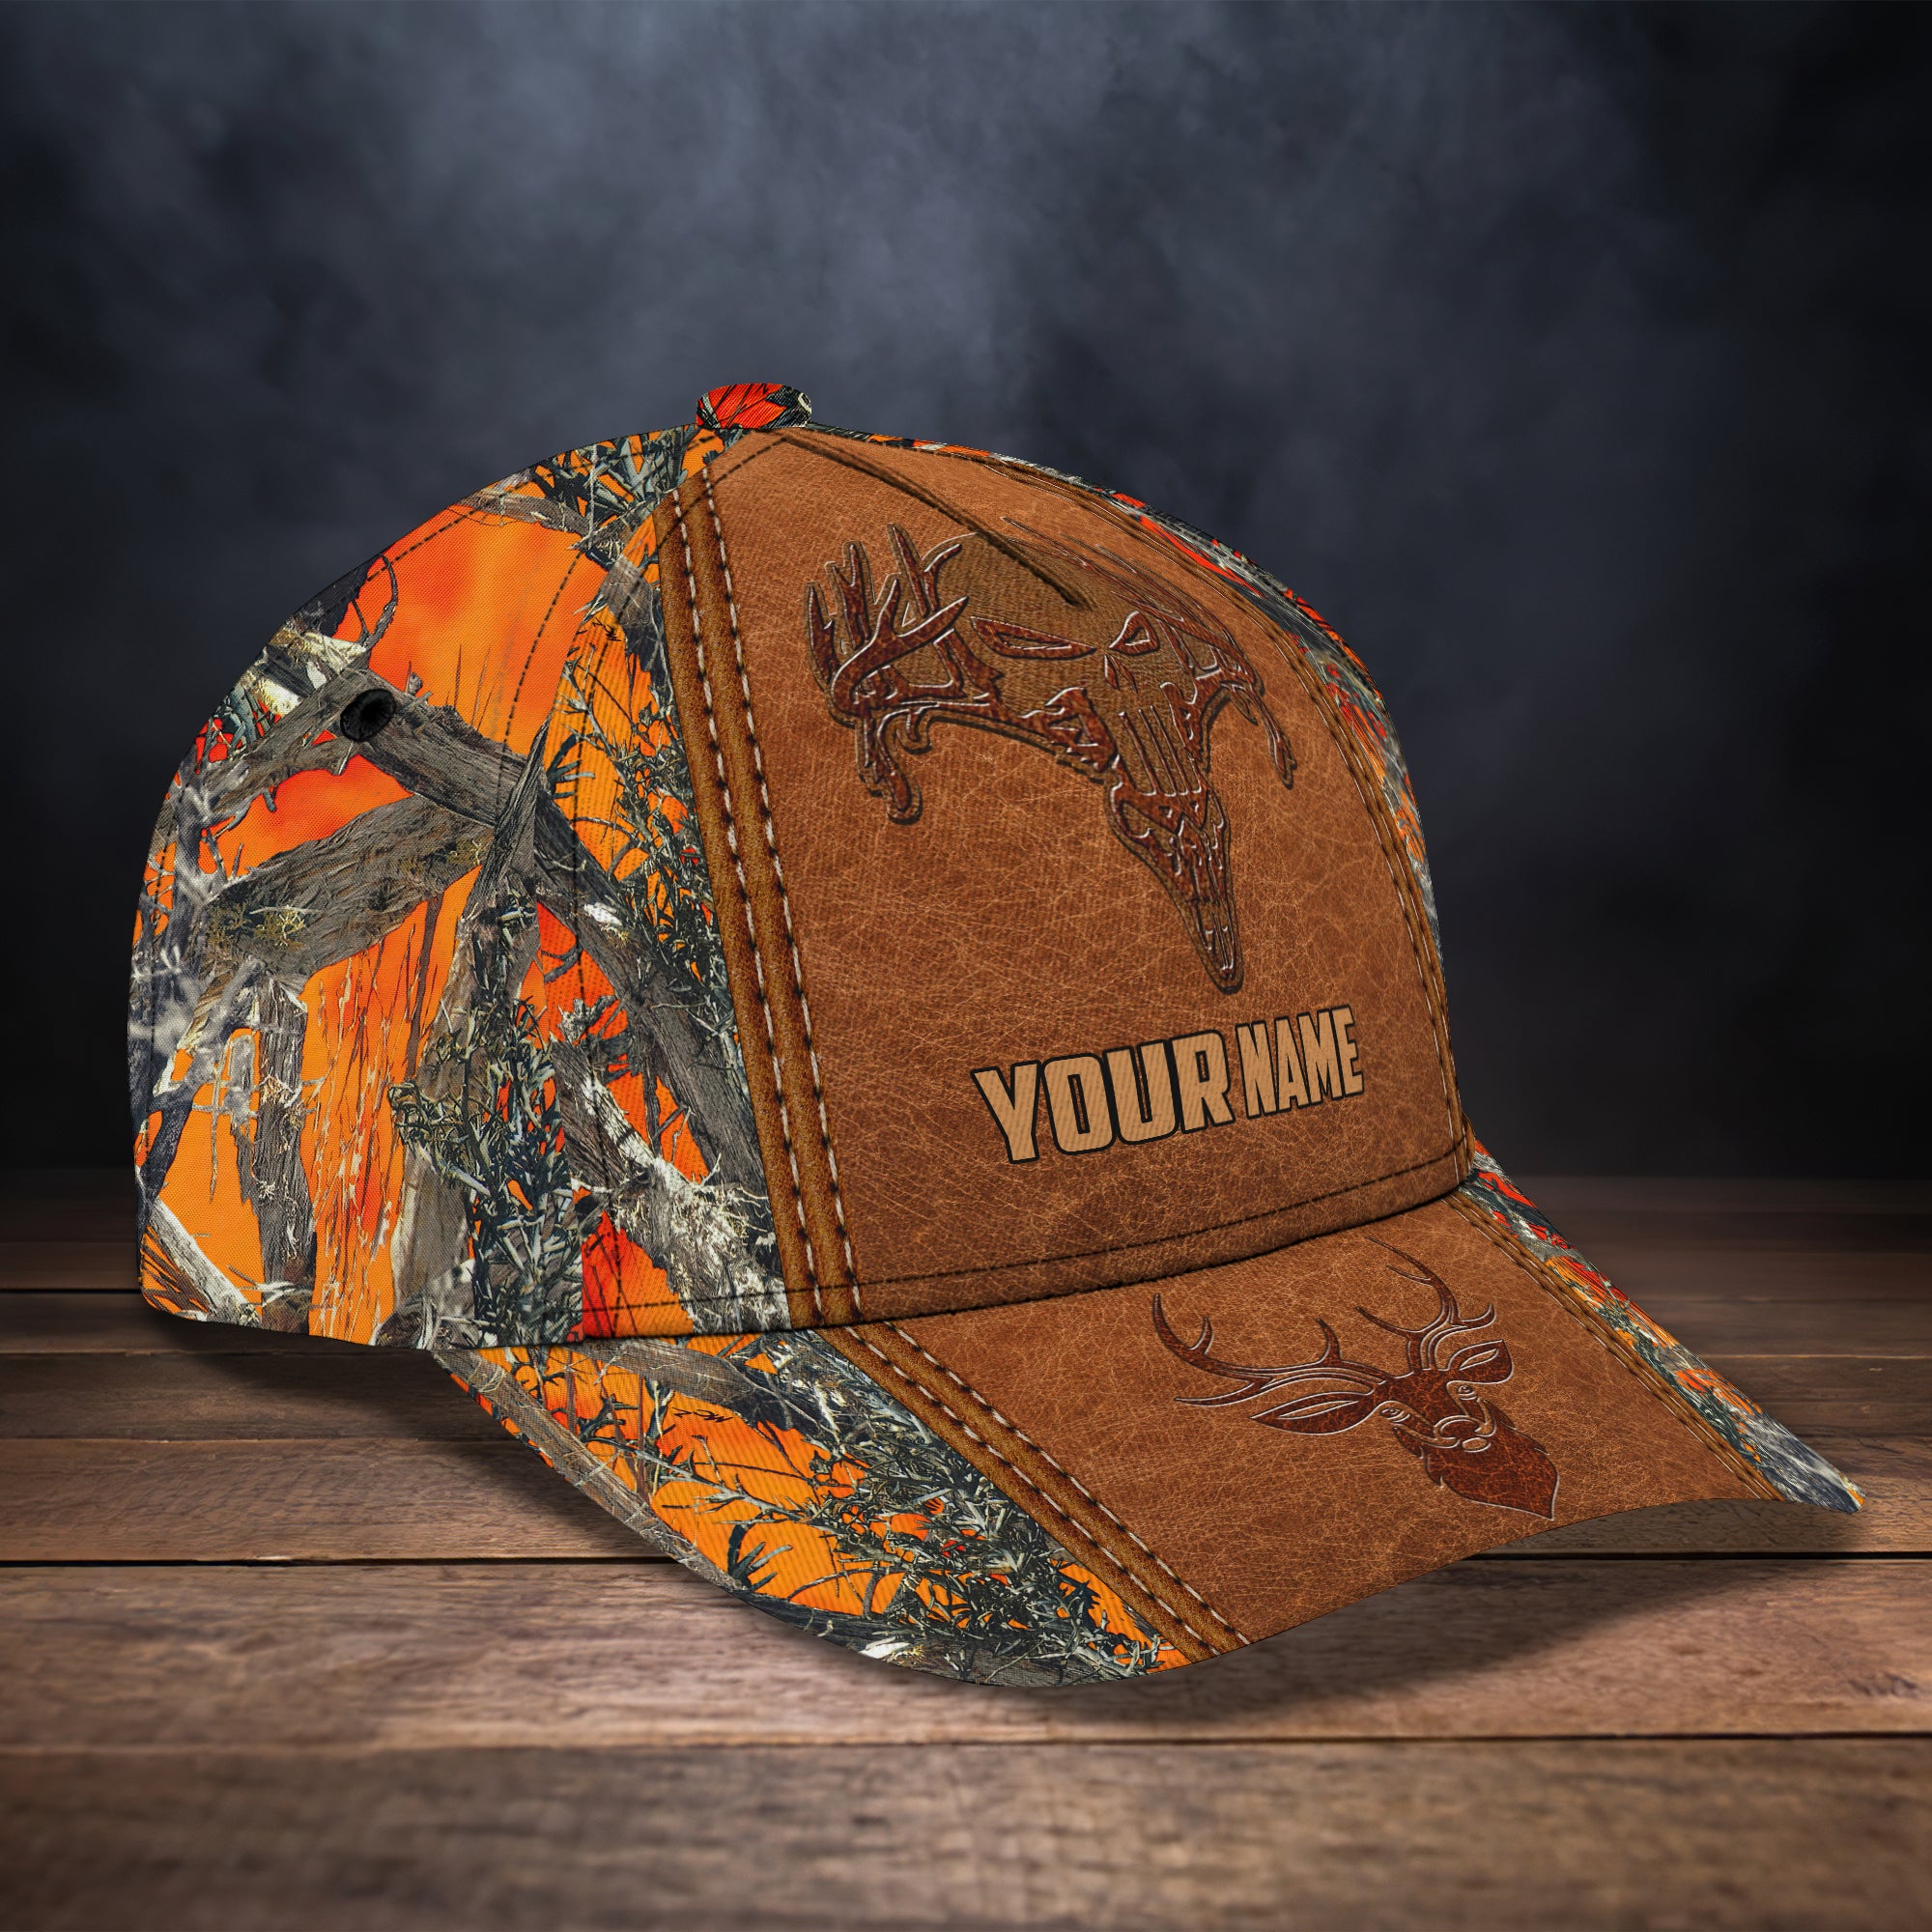 Hunting - Personalized Name Cap - DAT93-011